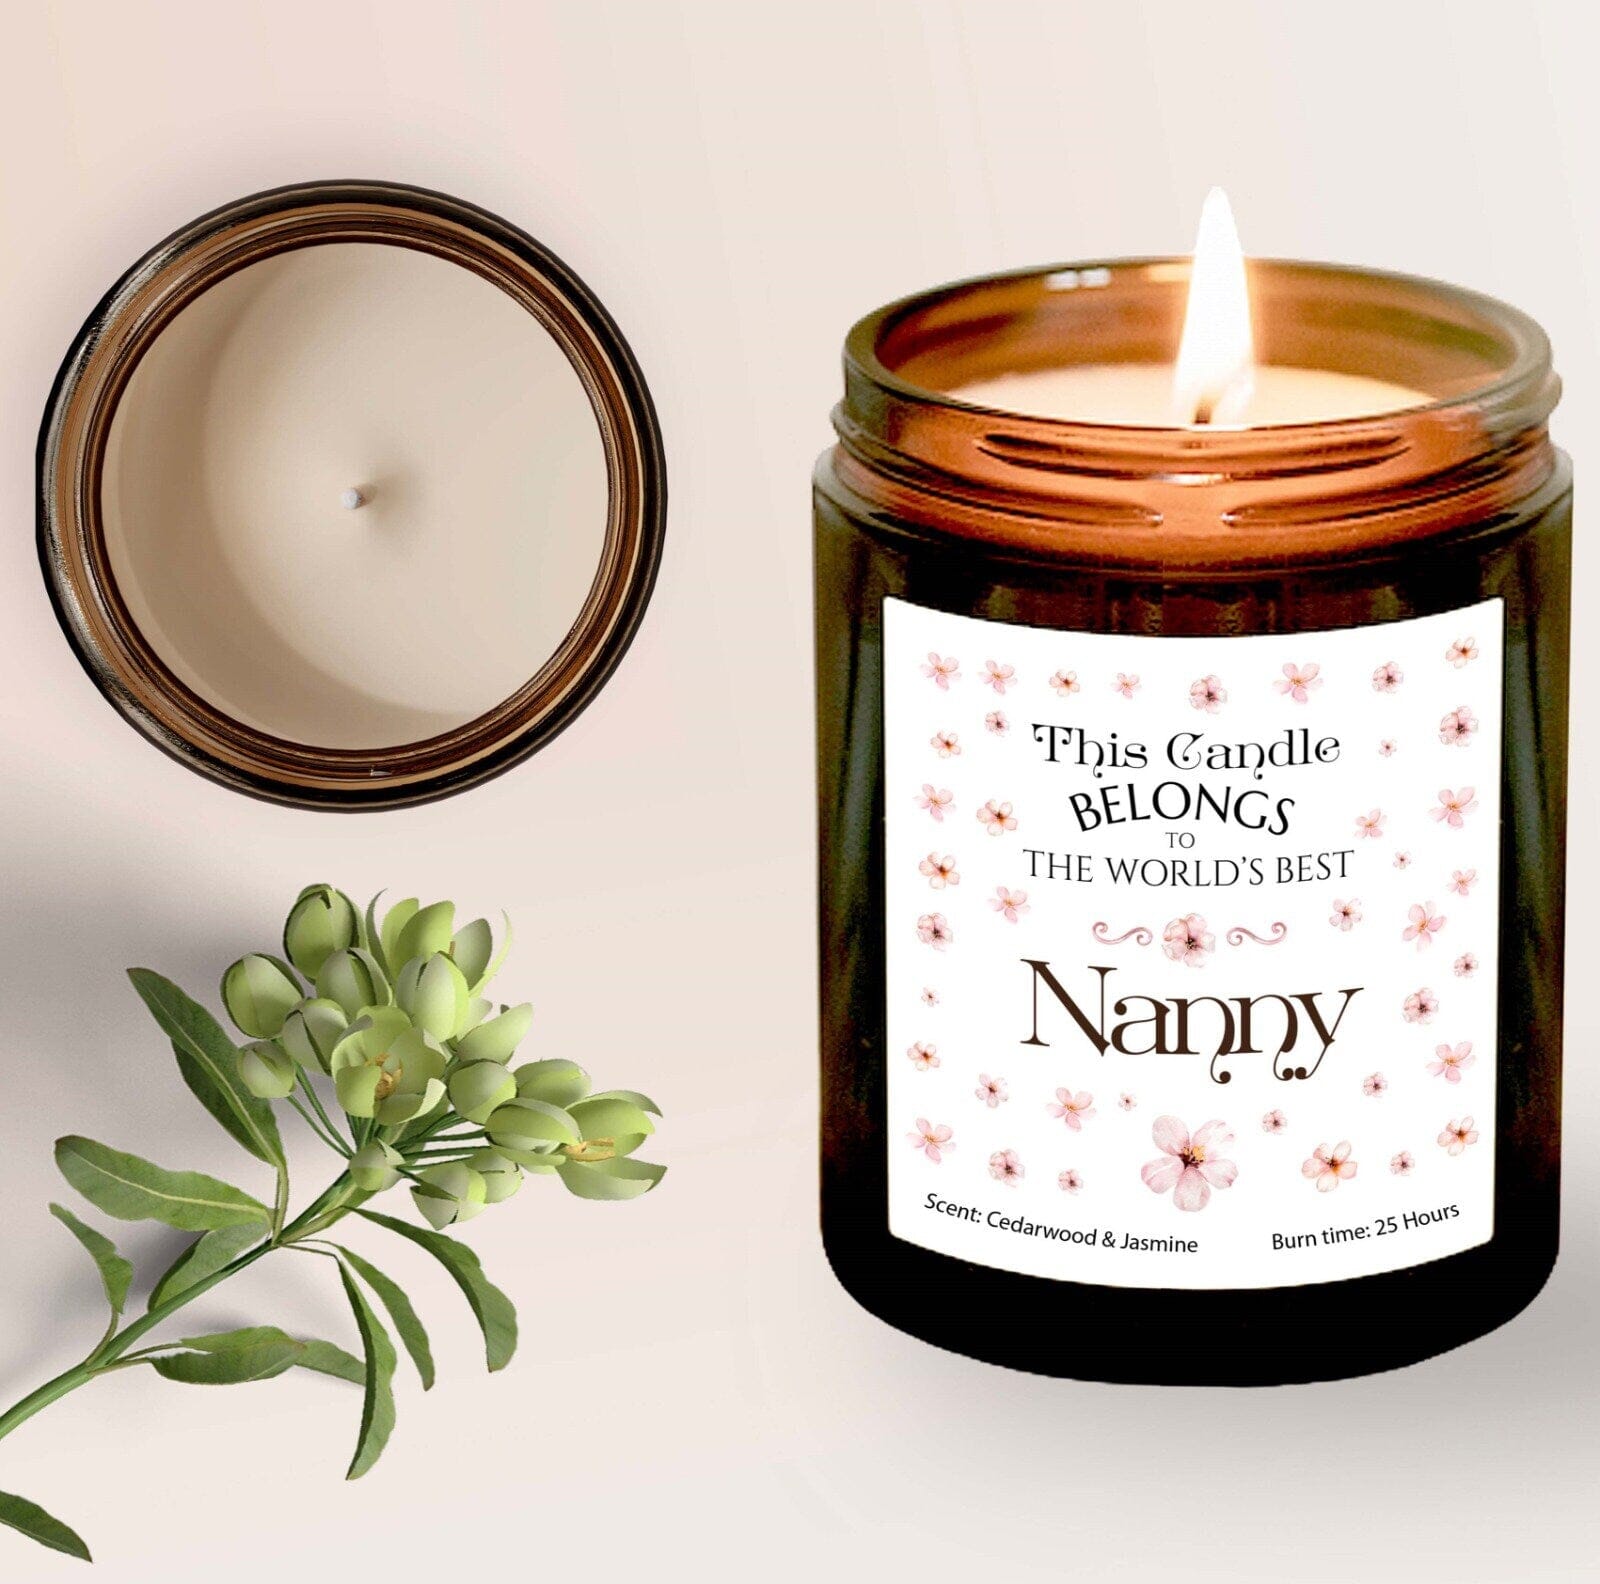 This Candle Belongs to The World's Best Nanny Scented Candle, Gift for grandma